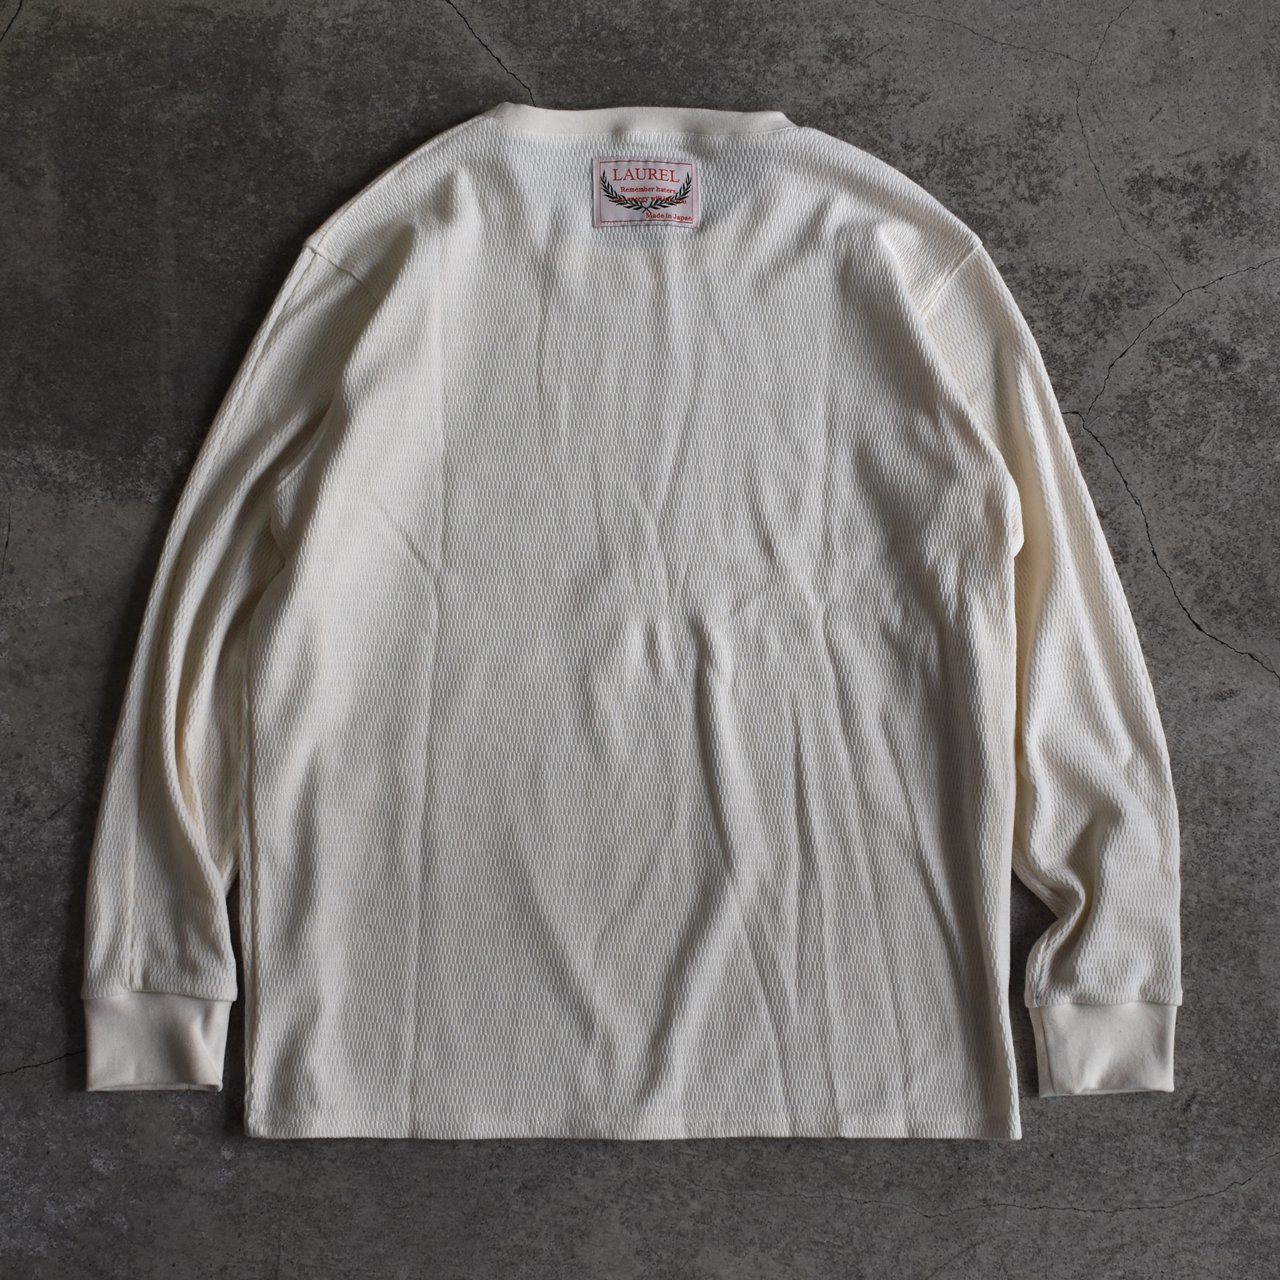 <img class='new_mark_img1' src='https://img.shop-pro.jp/img/new/icons5.gif' style='border:none;display:inline;margin:0px;padding:0px;width:auto;' />oneby1 LAUREL ()Thermal L/S Tee Off White
